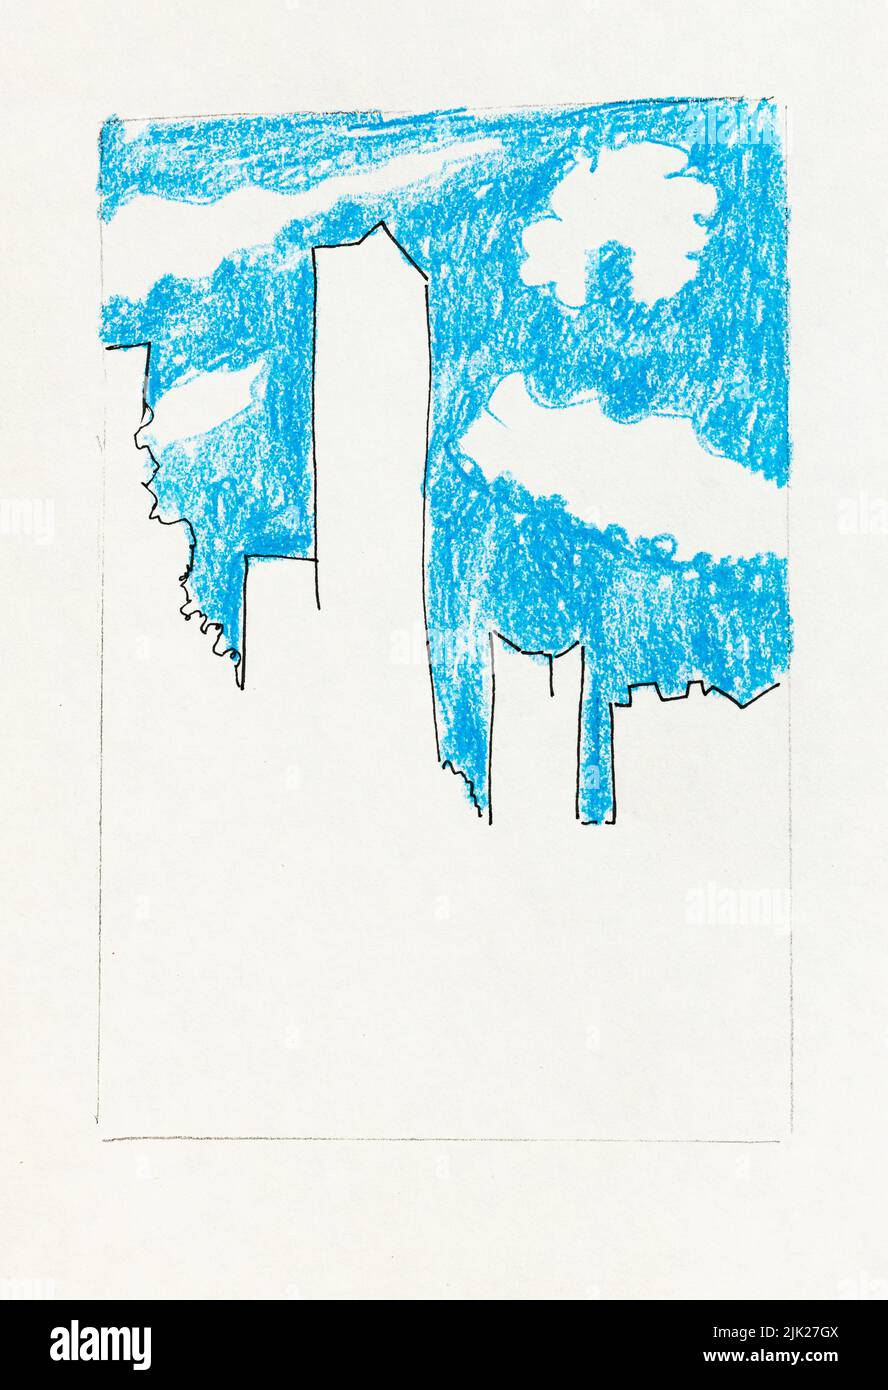 outline sketch of Guangzhou city skyline China under blue sky with white clouds in hand-drawn with black pen and color pencils on old white textured p Stock Photo